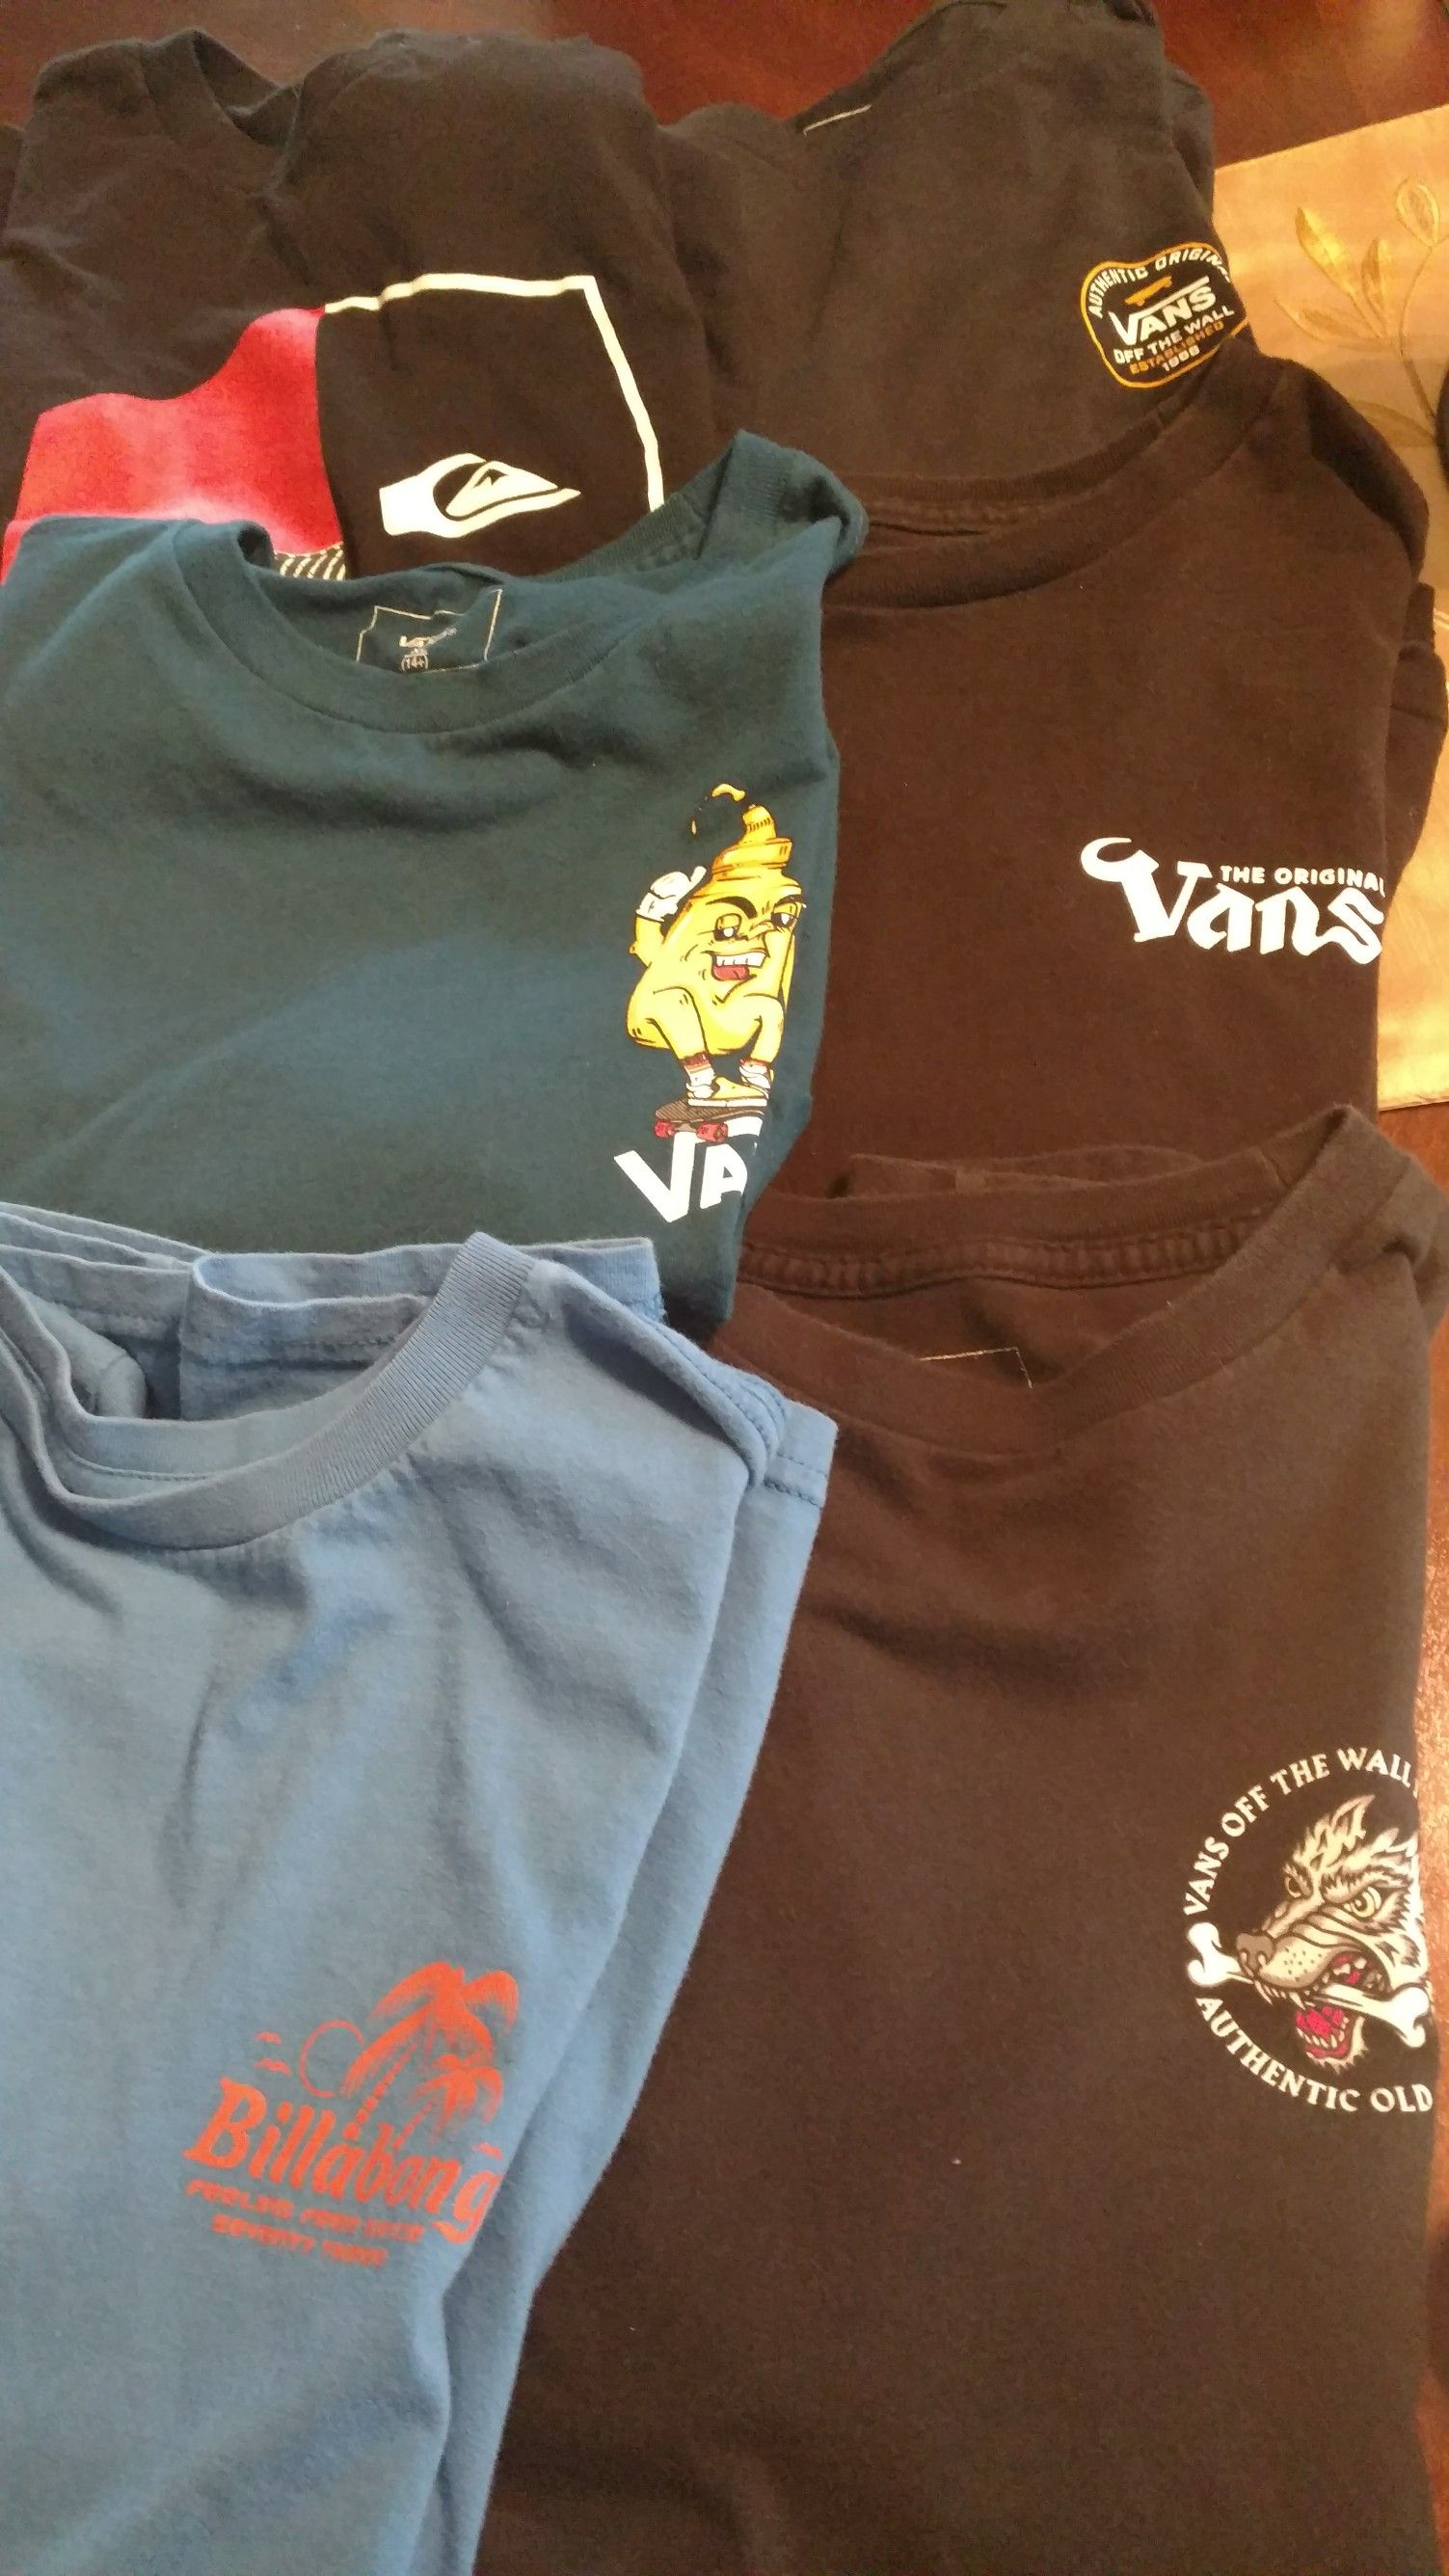 Quicksilver and Vans youth shirts